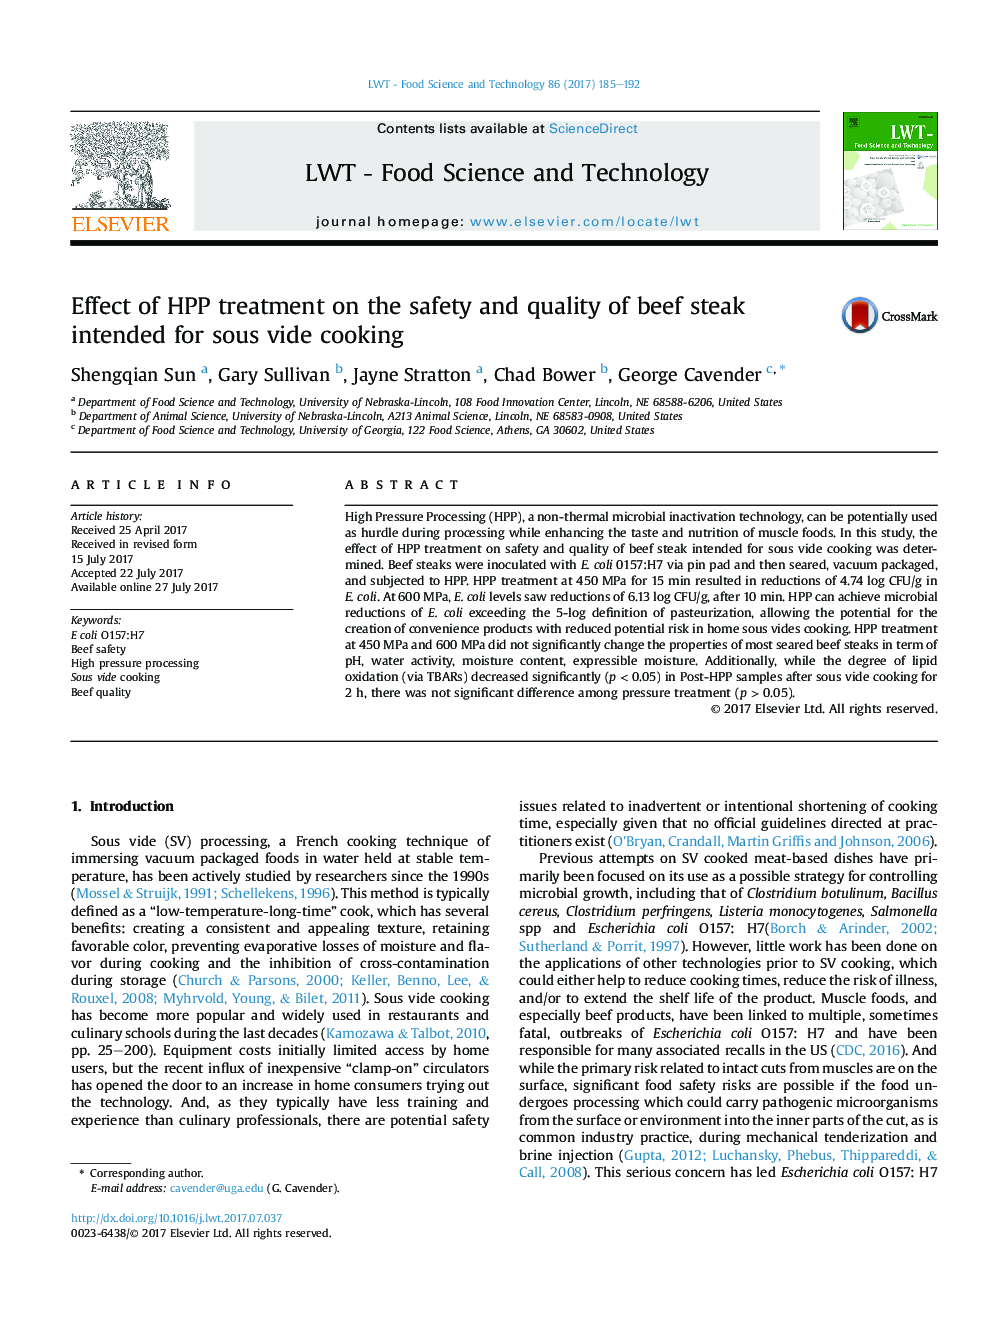 Effect of HPP treatment on the safety and quality of beef steak intended for sous vide cooking